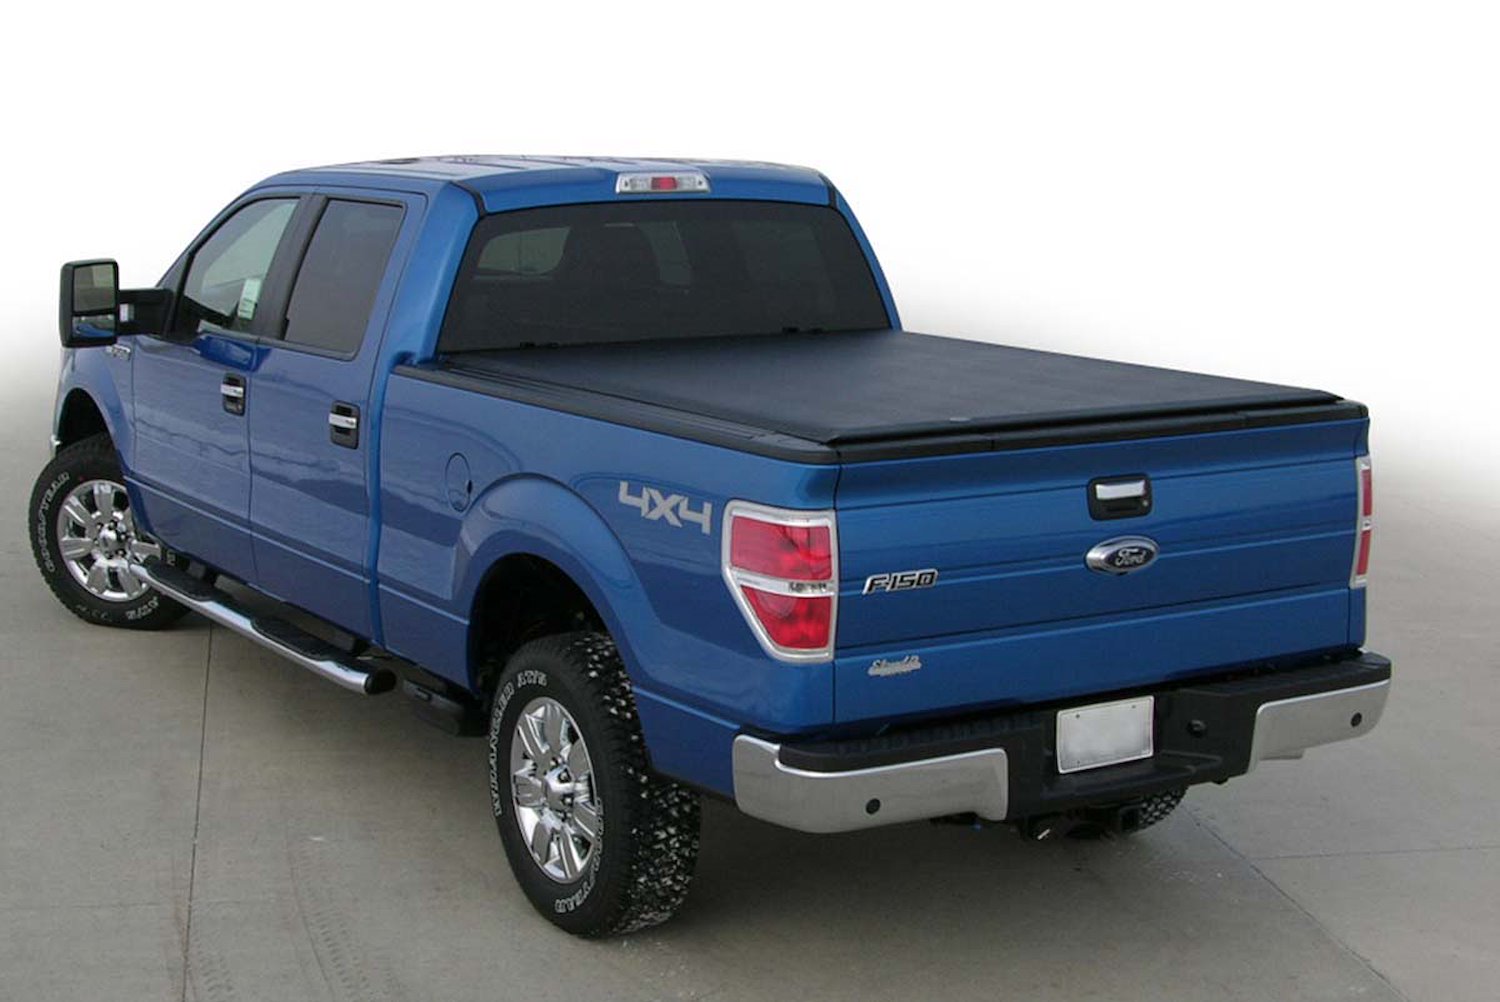 LORADO Roll-Up Tonneau Cover, 2008-2016 Ford F-250/F-350, with 6 ft. 8 in. Bed